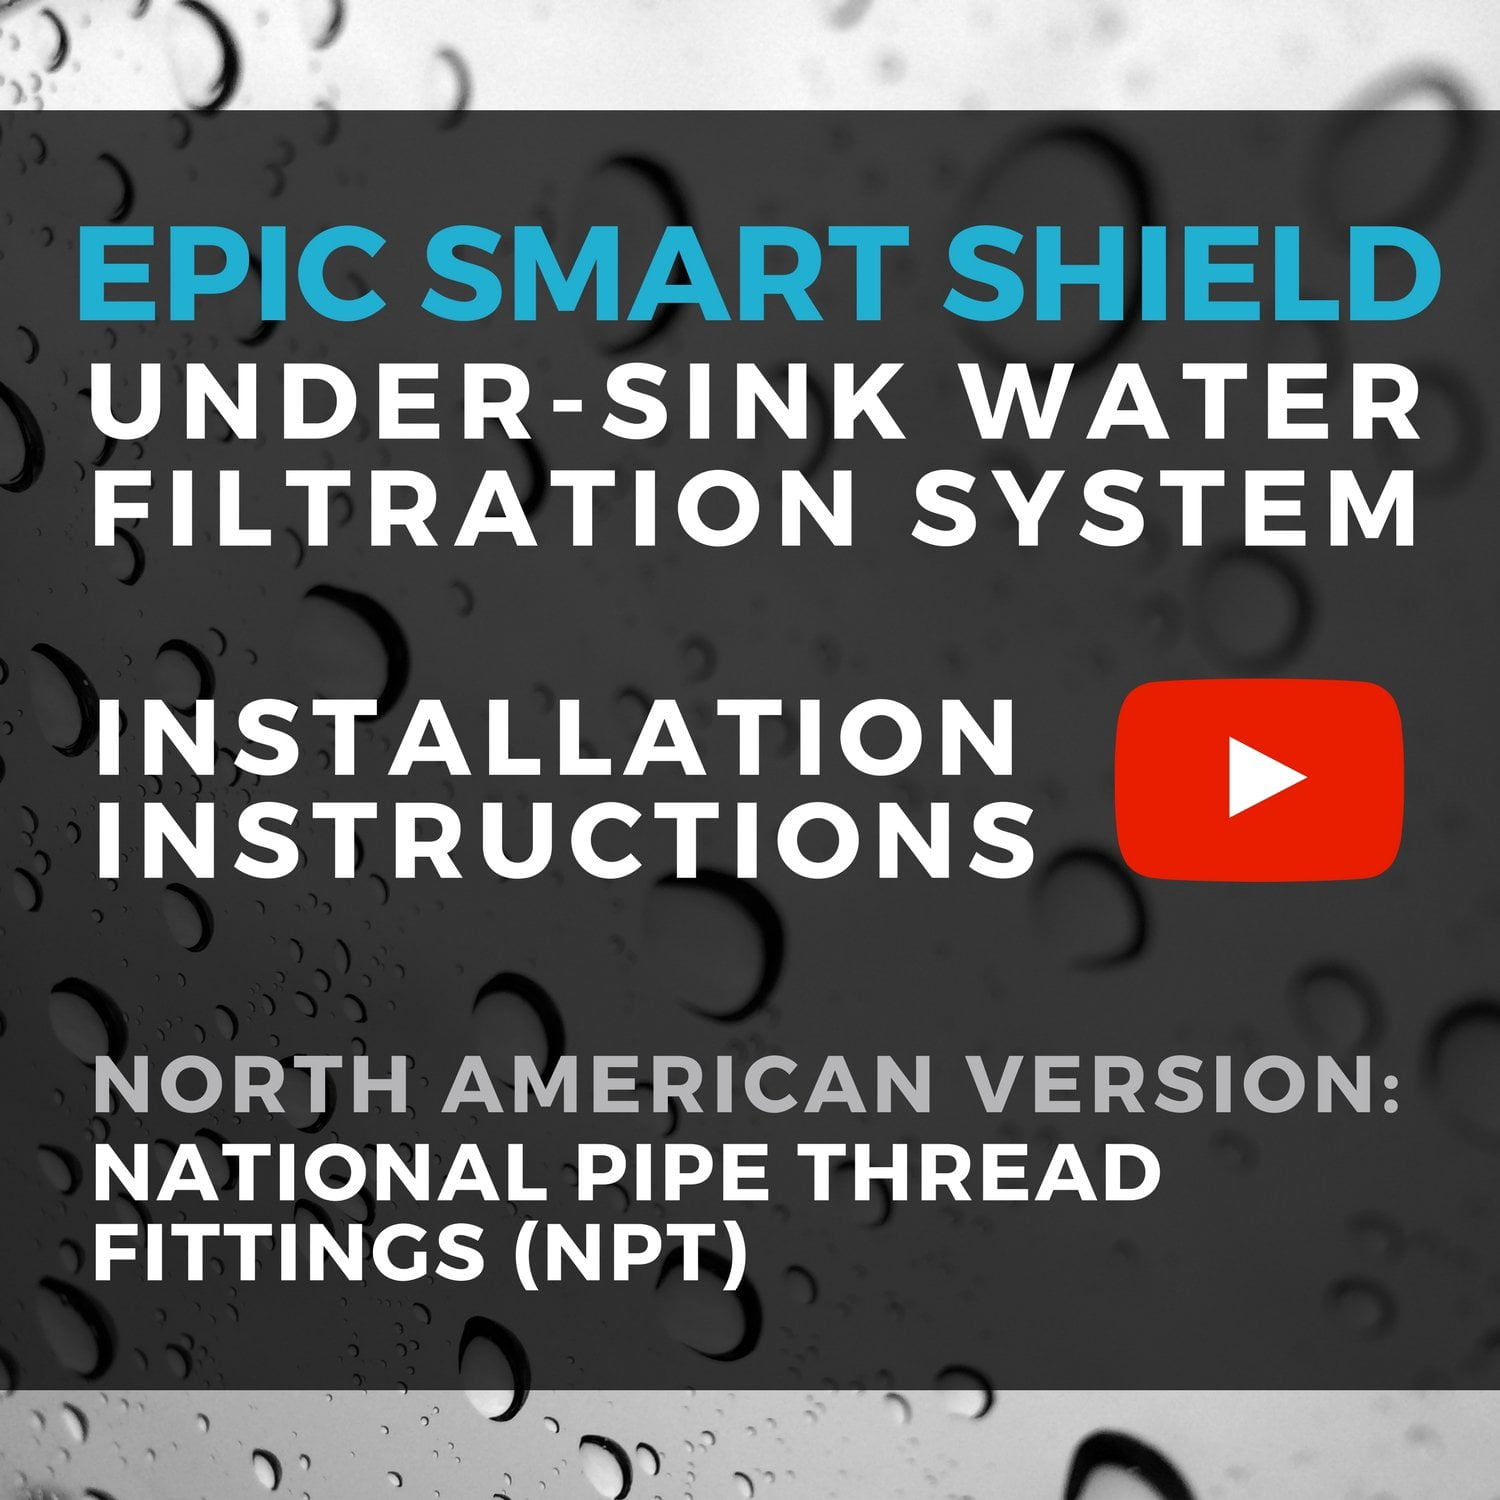 Triple Certified NSF Standards 42 53 /& 401 More Removes 99.99/% Contaminants Chloramine Removes Lead Multi Stage Under Sink Water Filter System Made in USA TTHM Epic Smart Shield